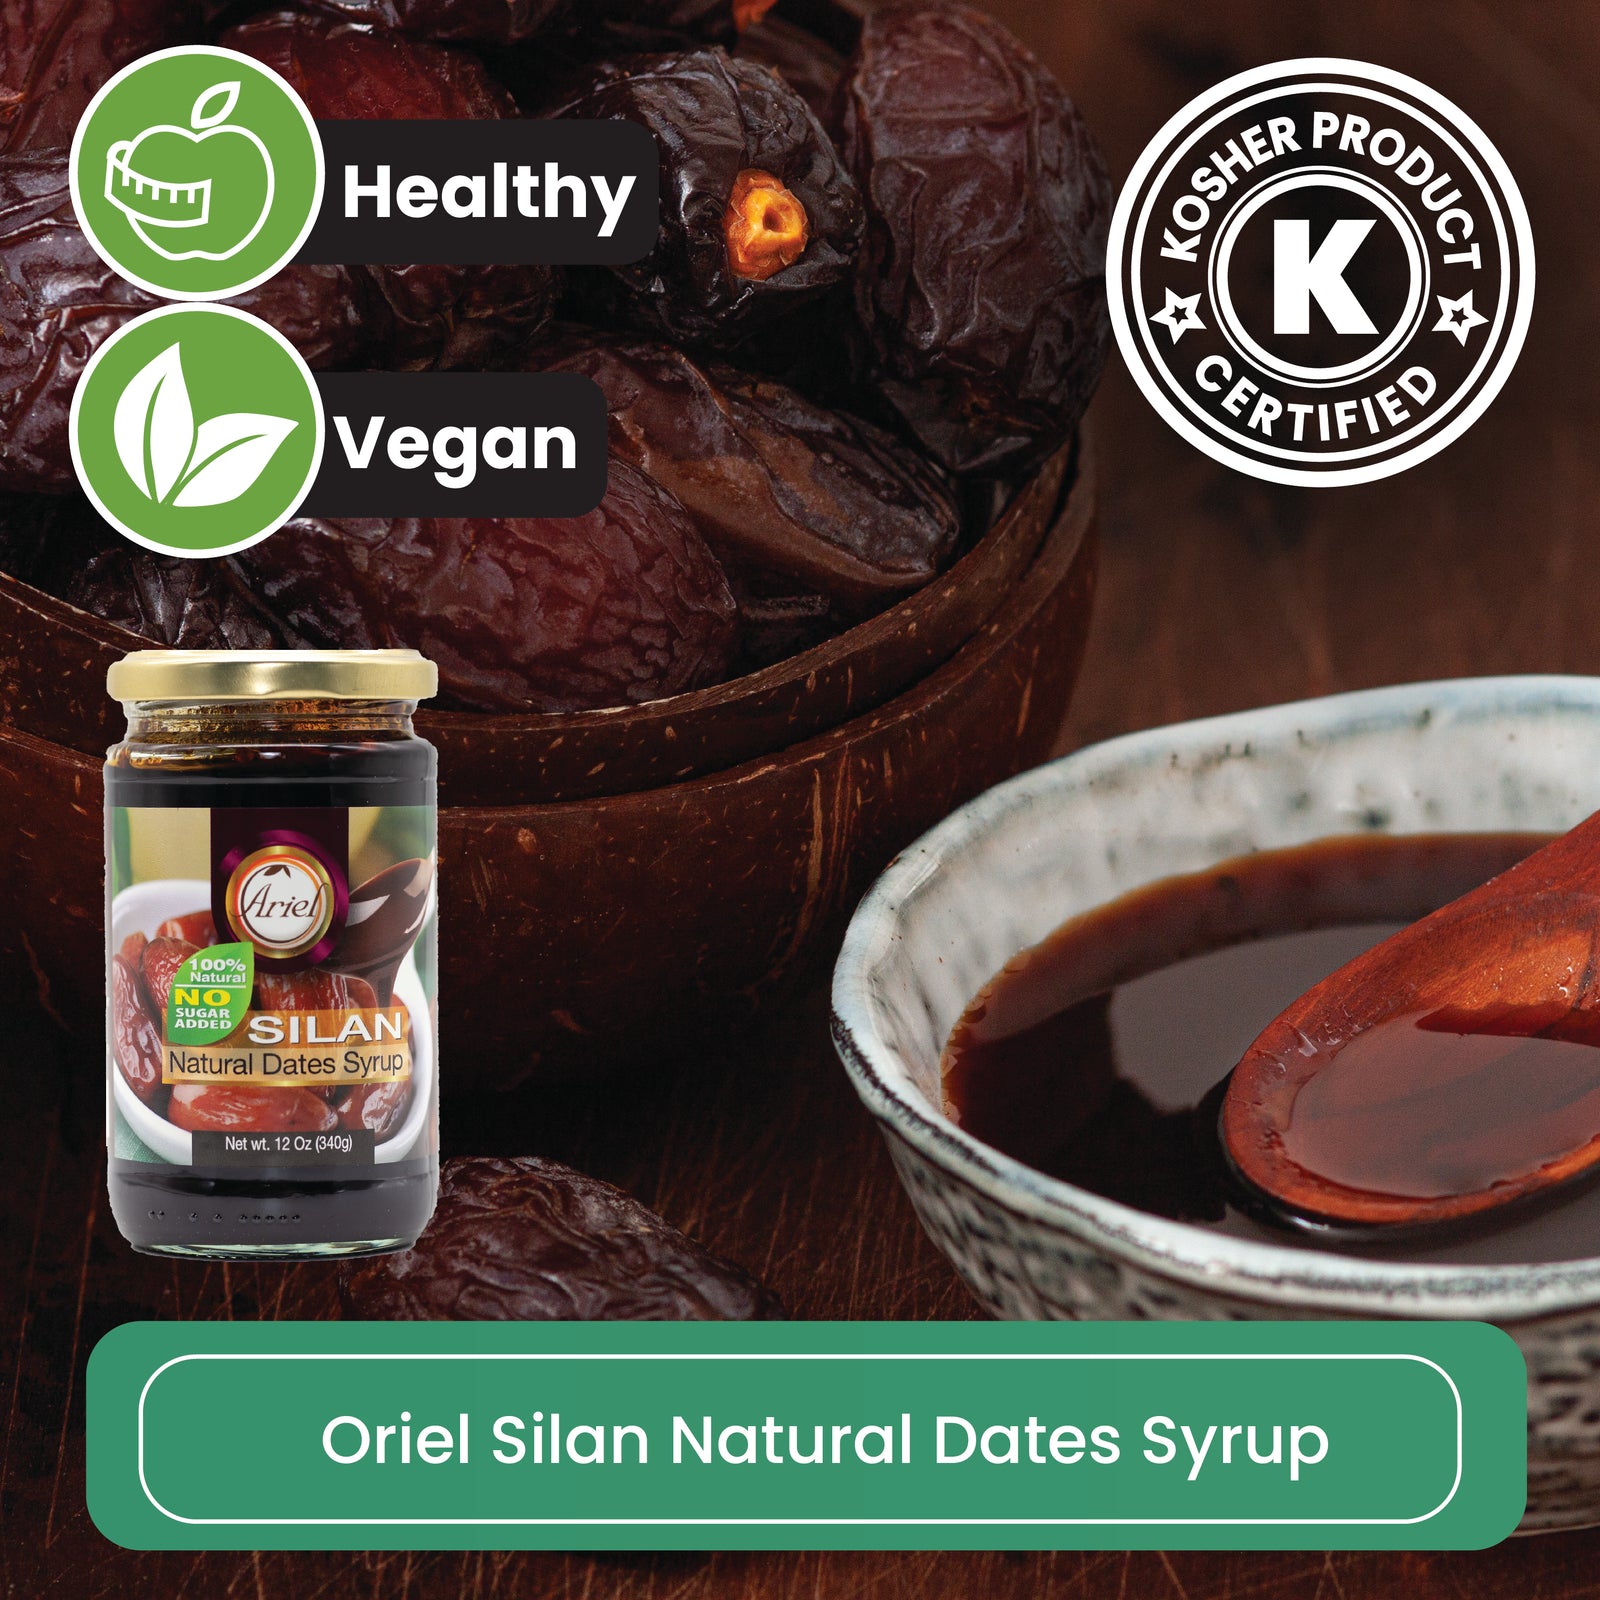 Ariel Silan Selected Dates Syrup